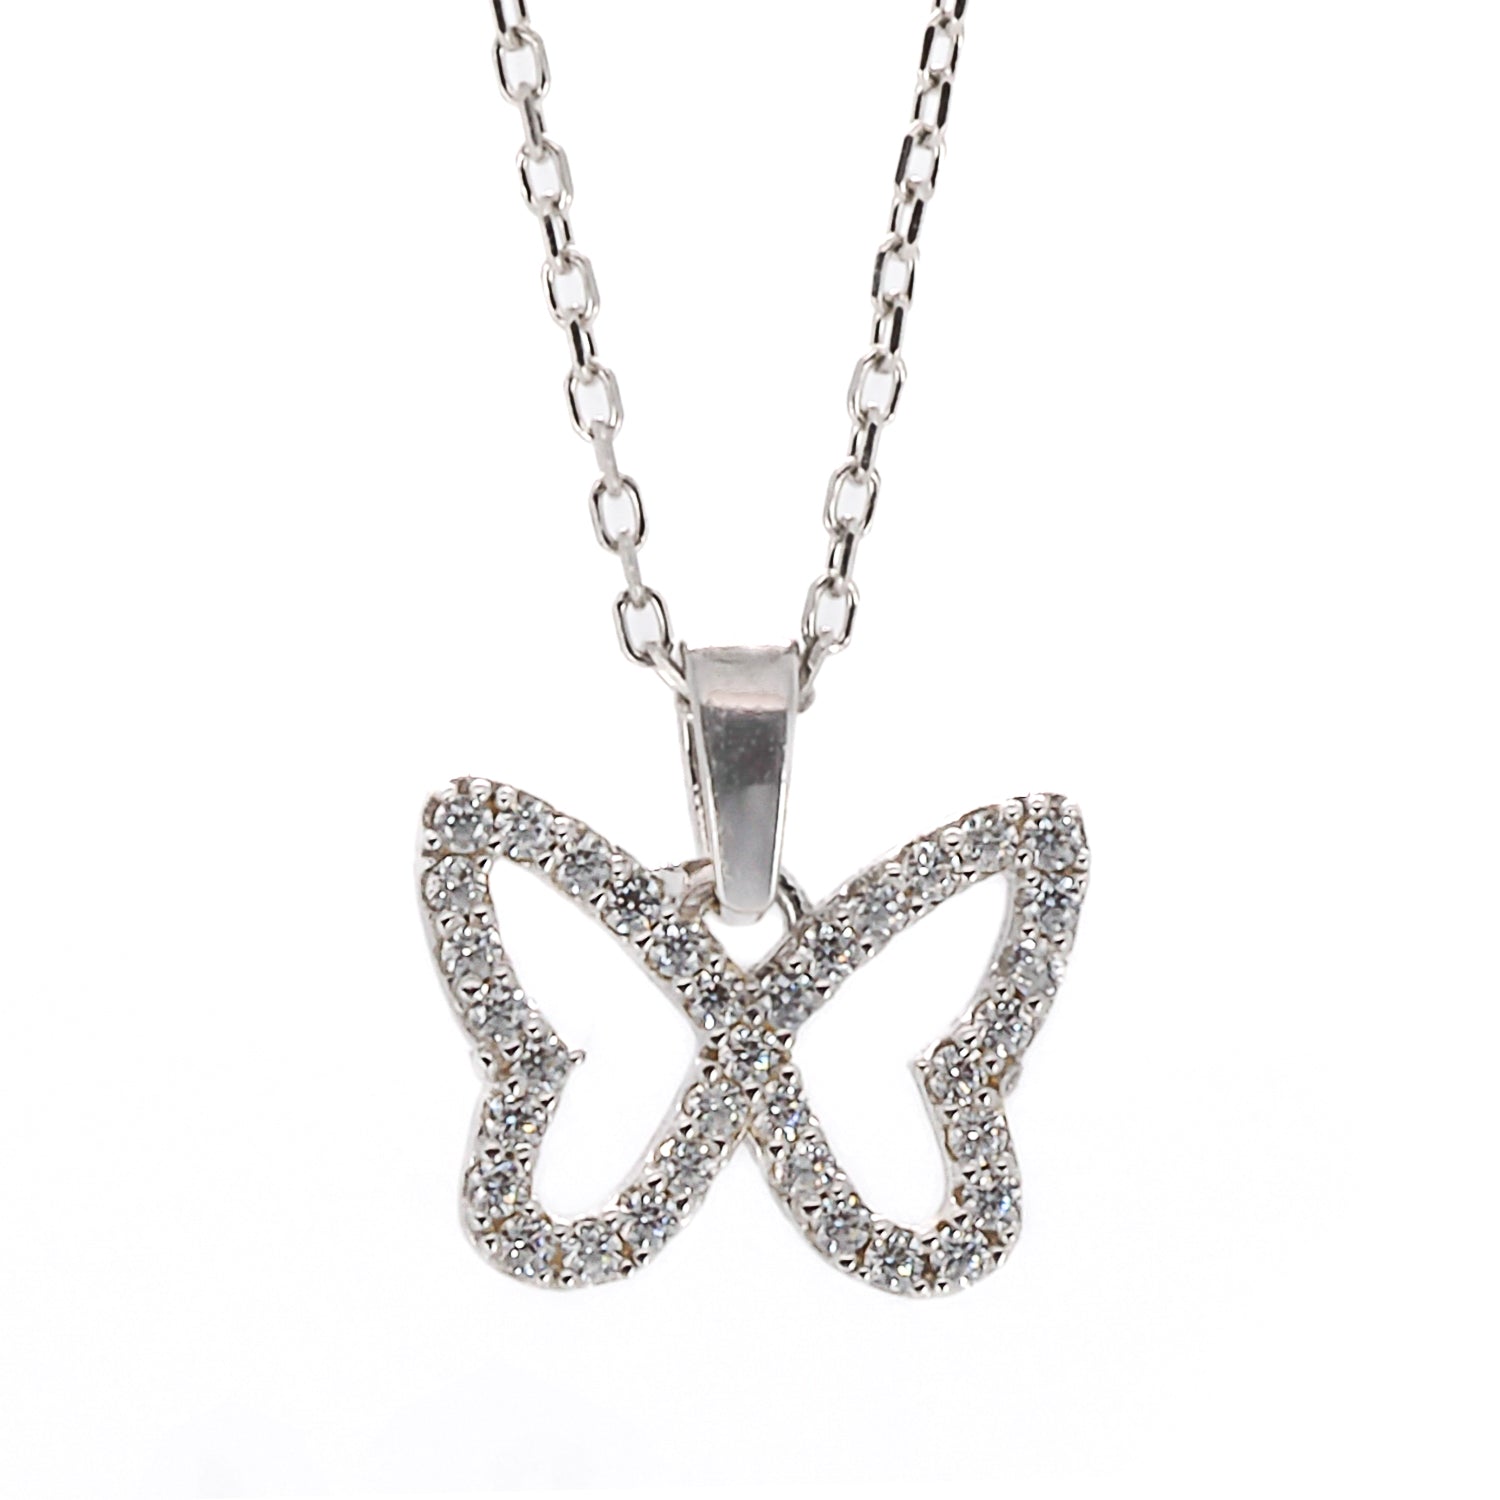 A close-up of the CZ diamond-adorned butterfly pendant on the Silver Sparkly Butterfly Necklace.